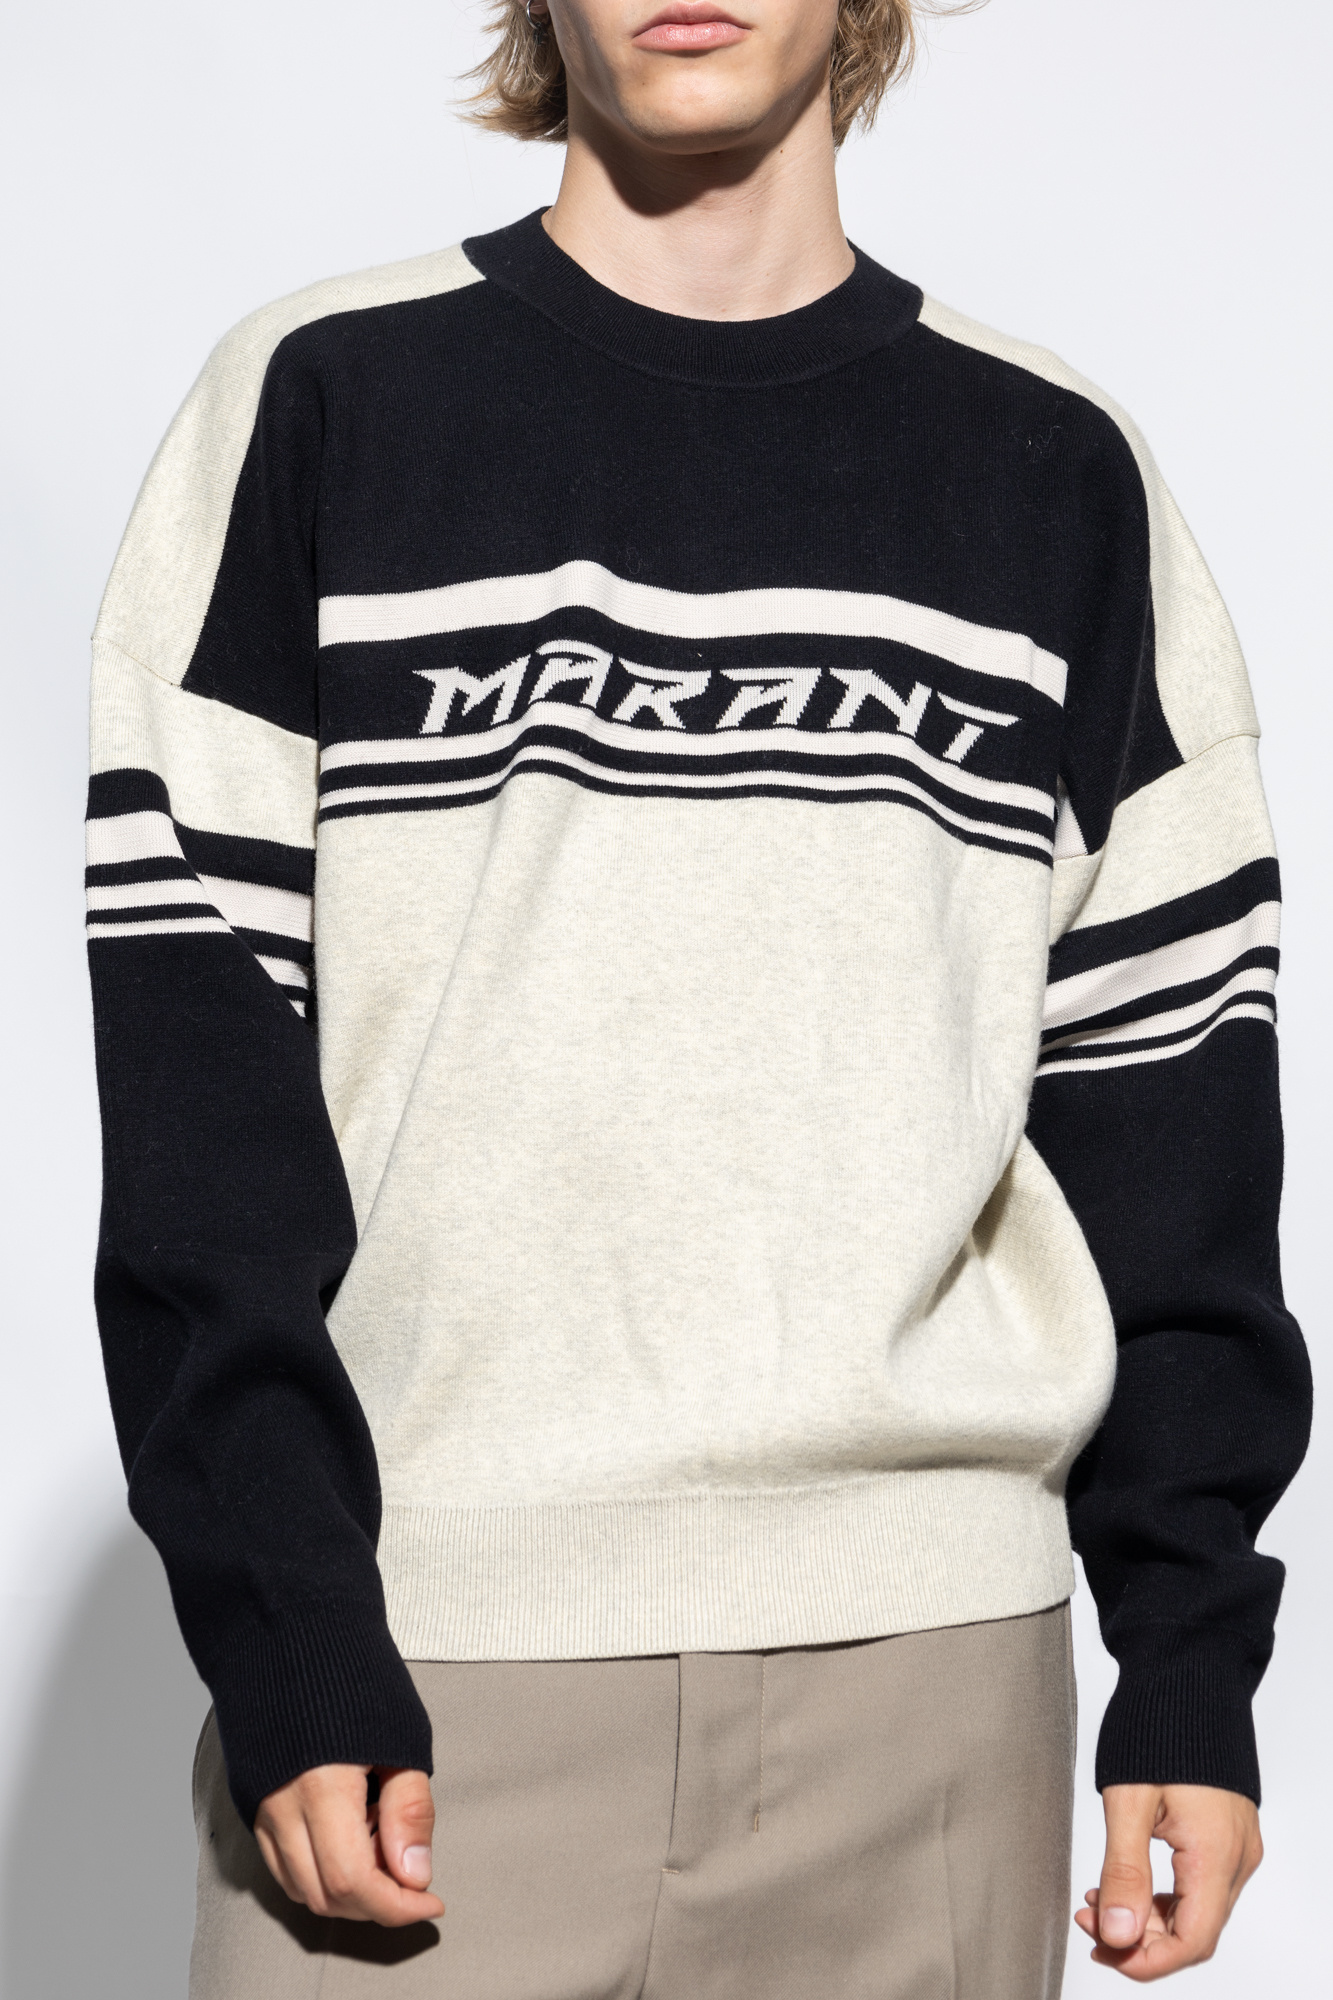 MARANT ‘Colby’ sweater